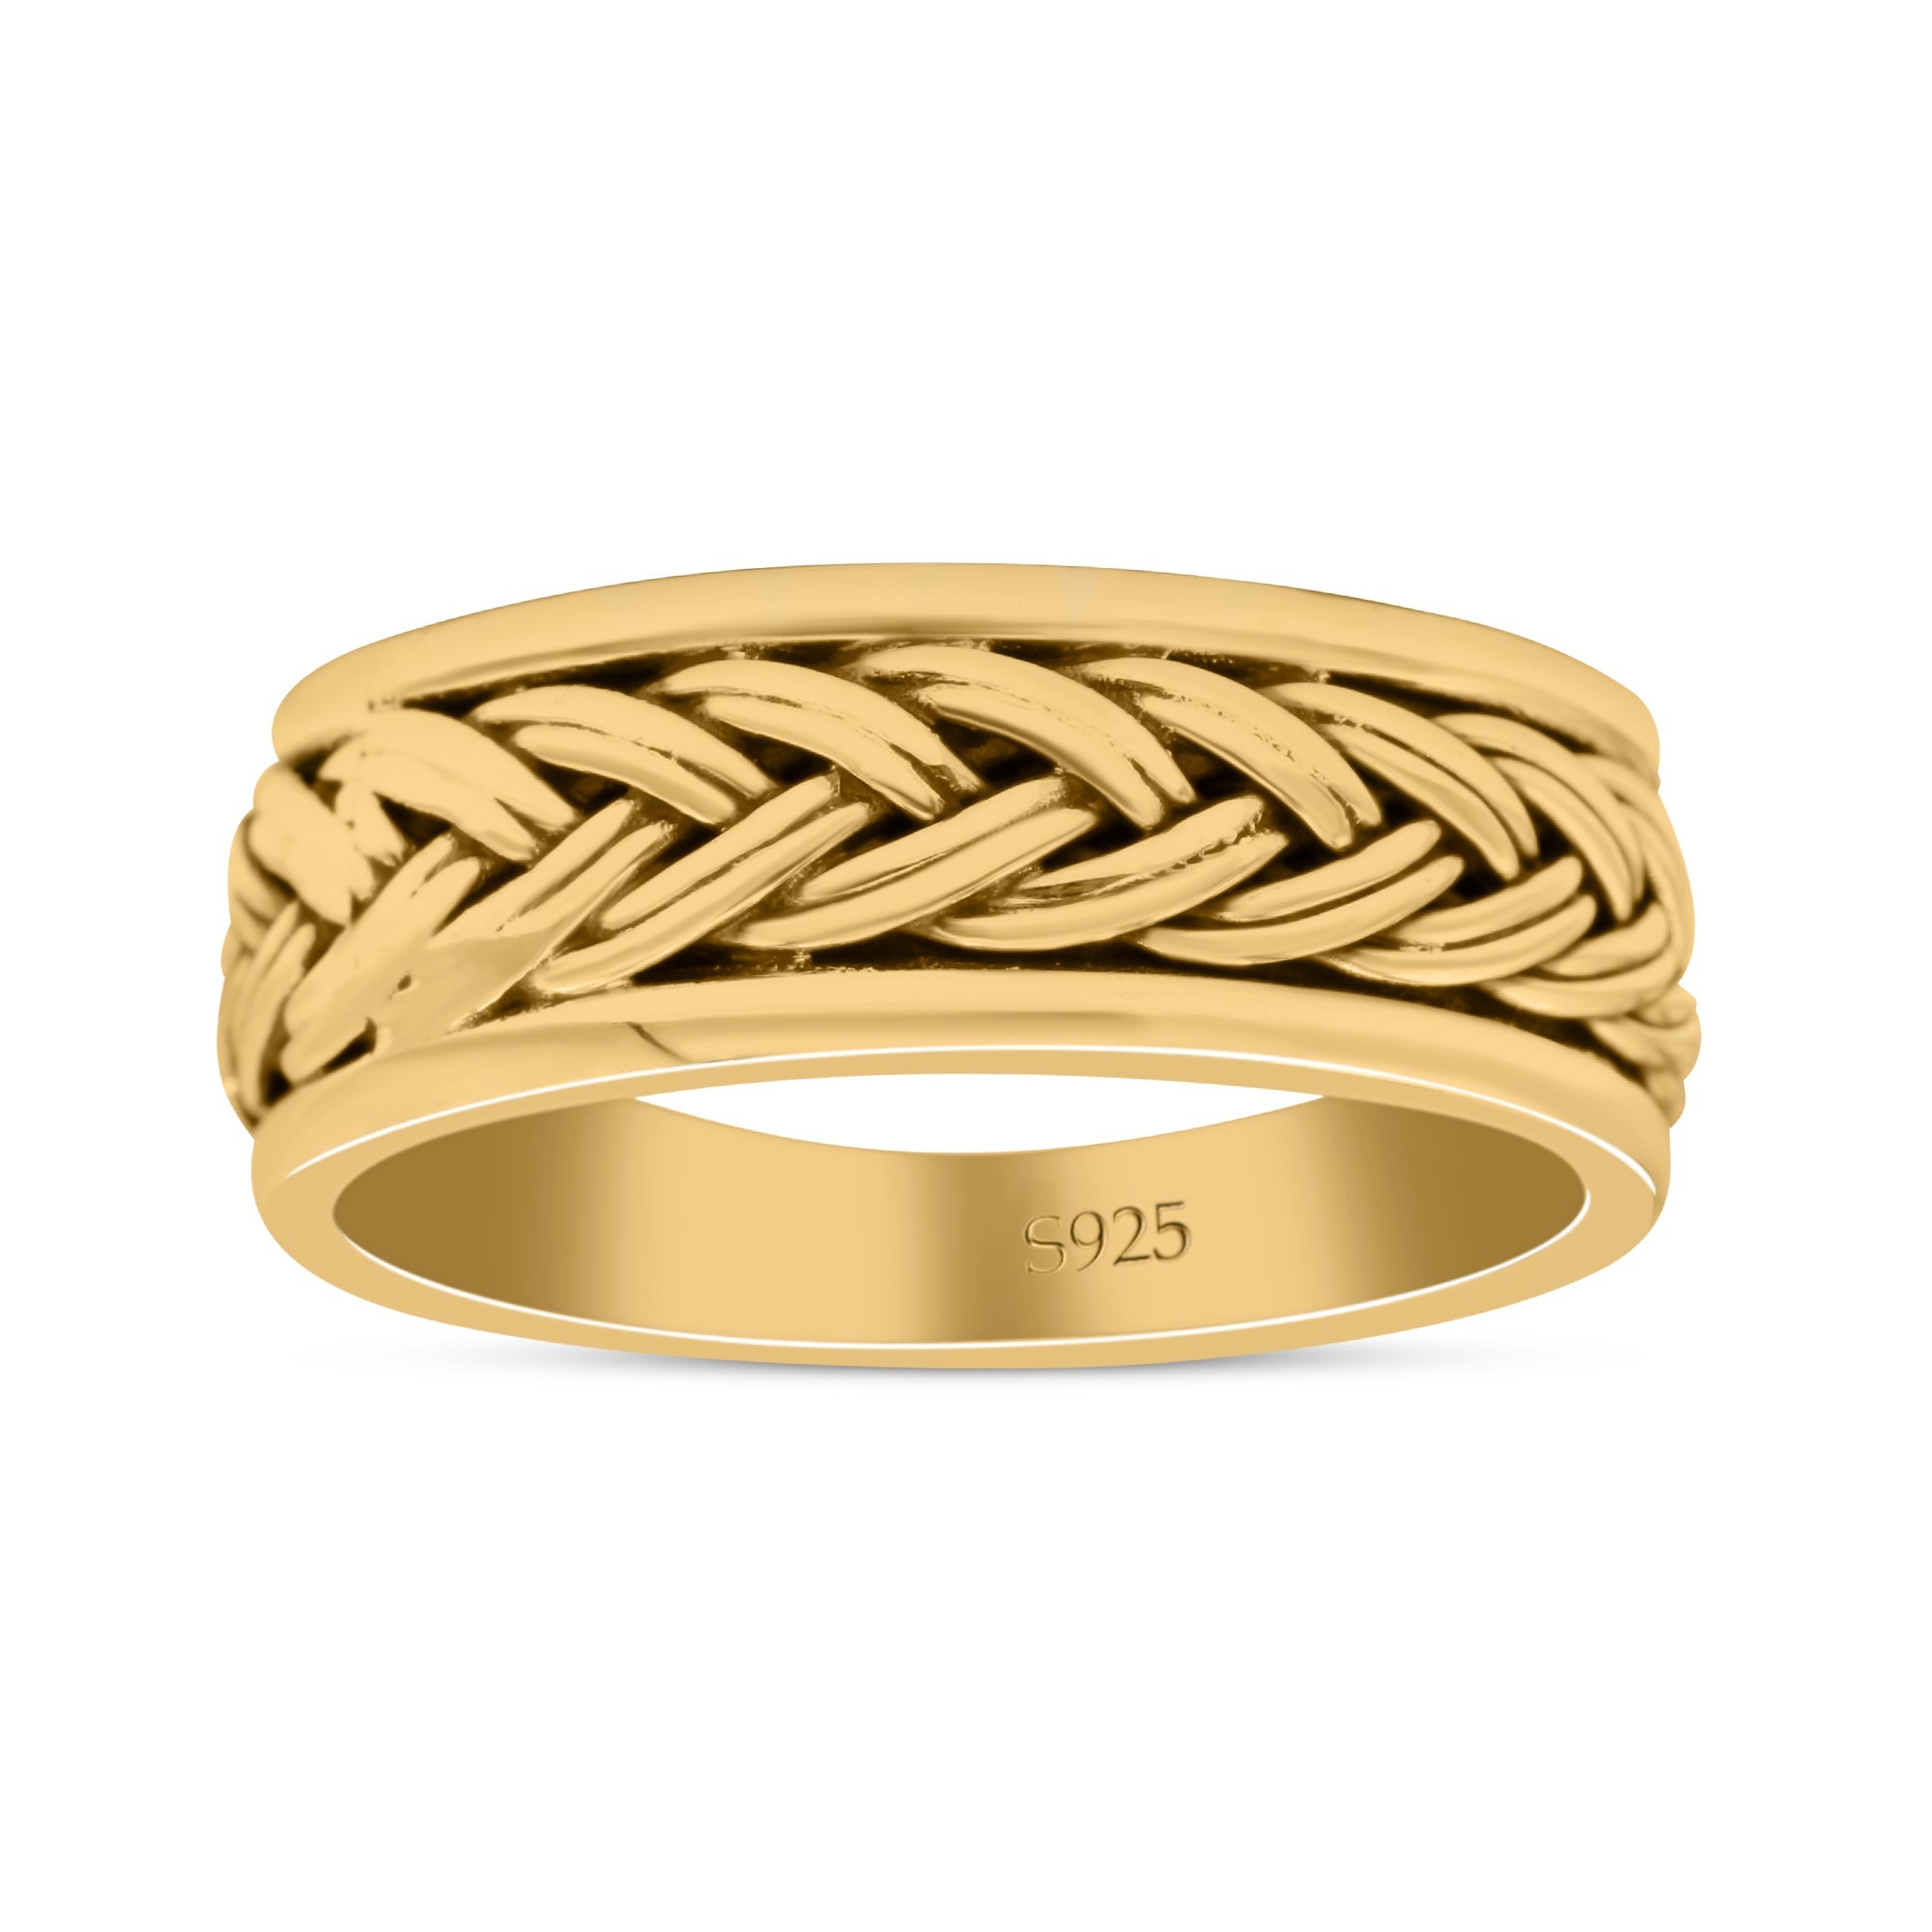 Buy Gold Thumb Ring Online In India - Etsy India